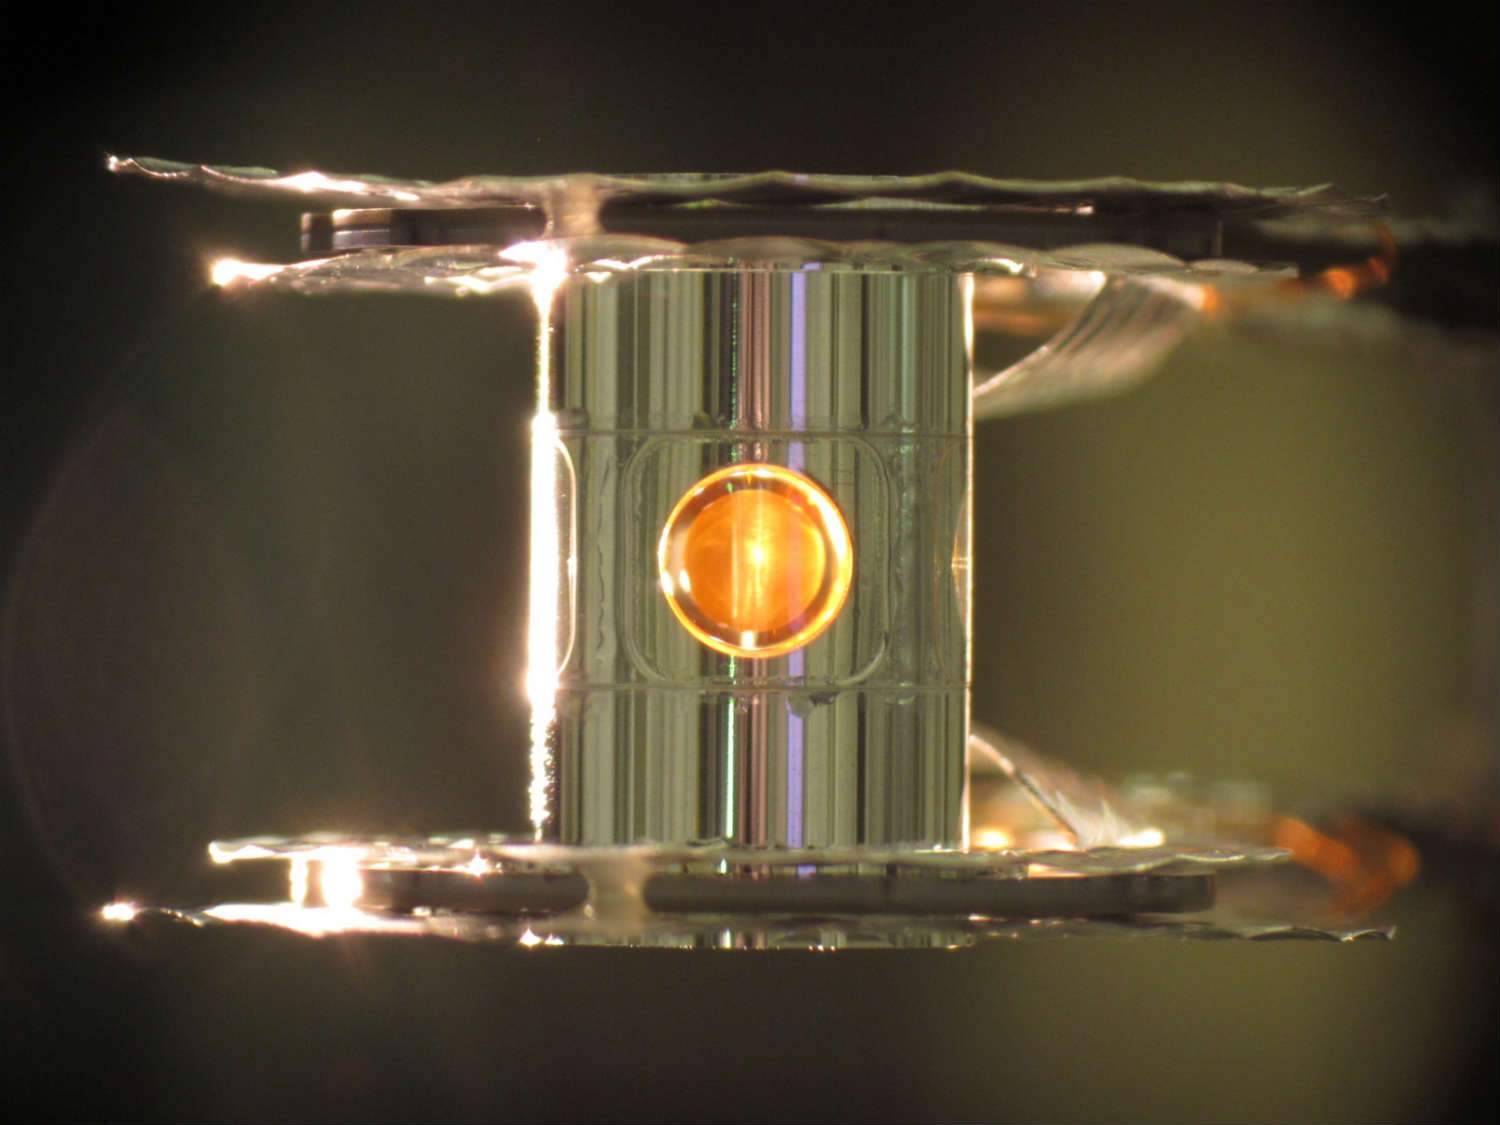 Nuclear fusion takes place within this tiny capsule of hydrogen (Dr. Eddie Dewald)